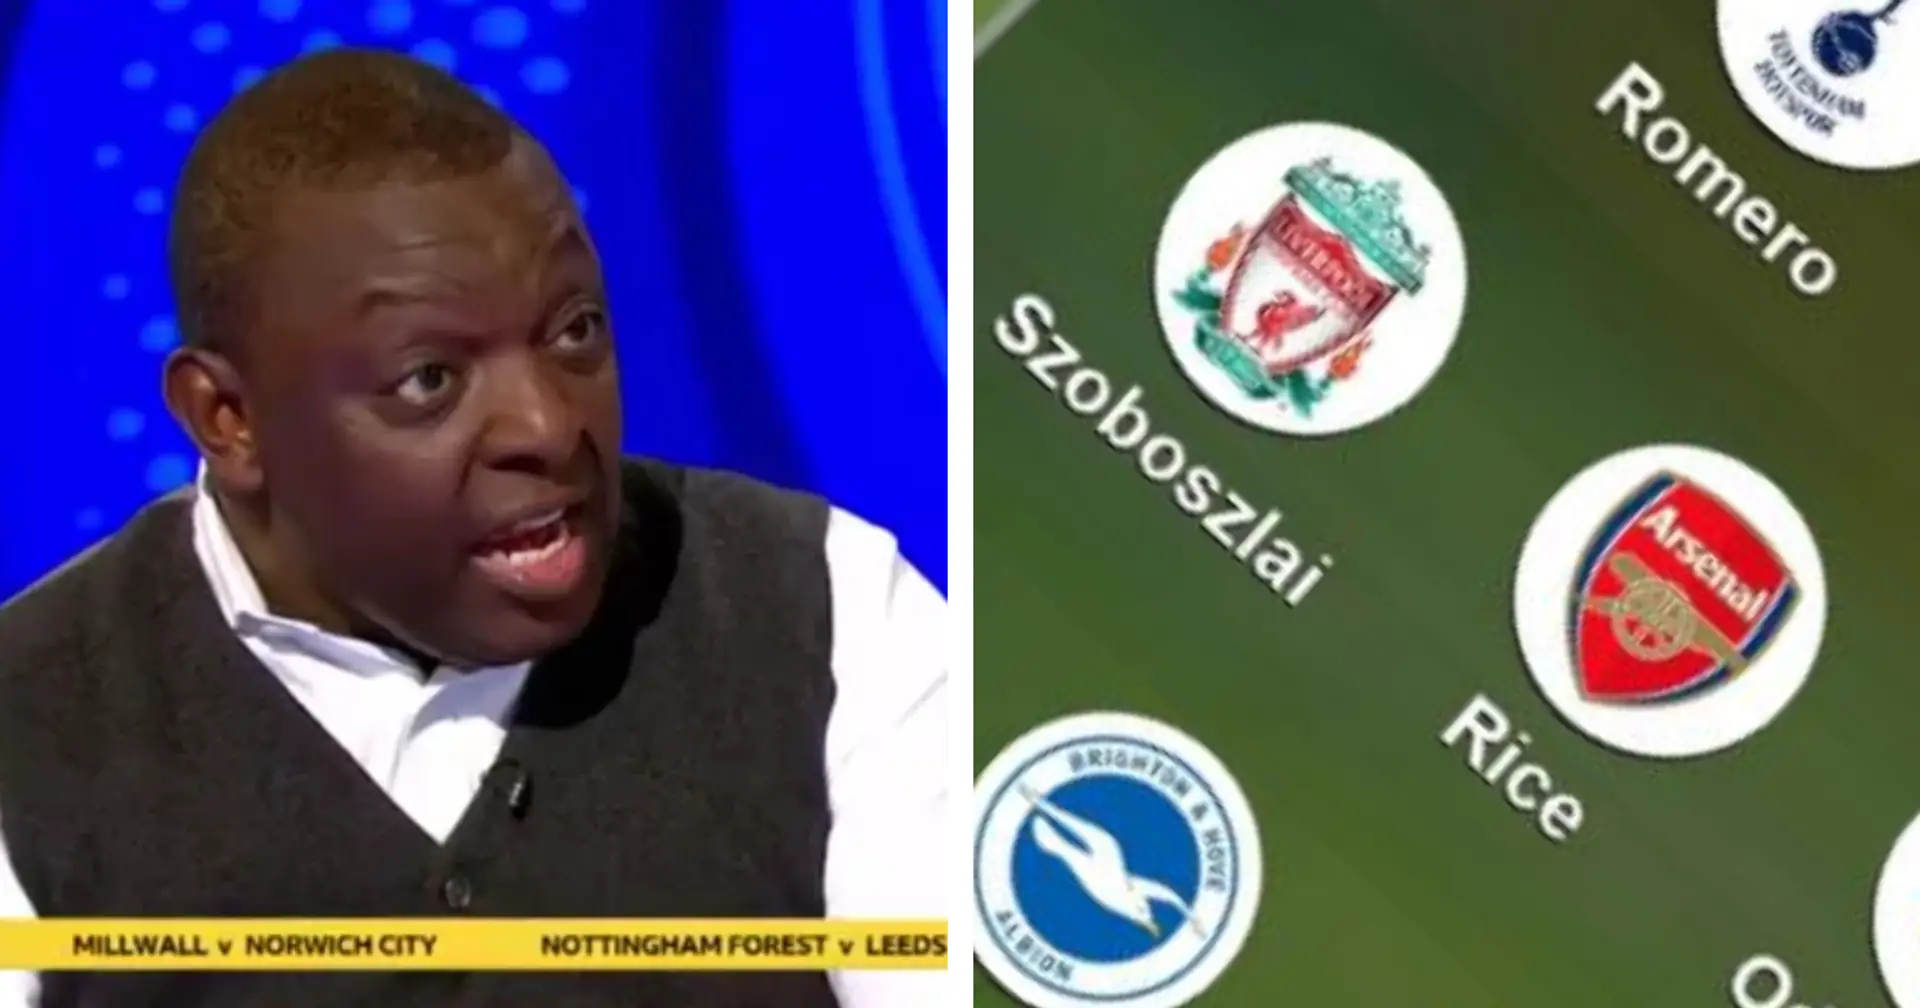 'These goals win you titles': Declan Rice & one more Arsenal star included in Garth Crooks' Team of the Week